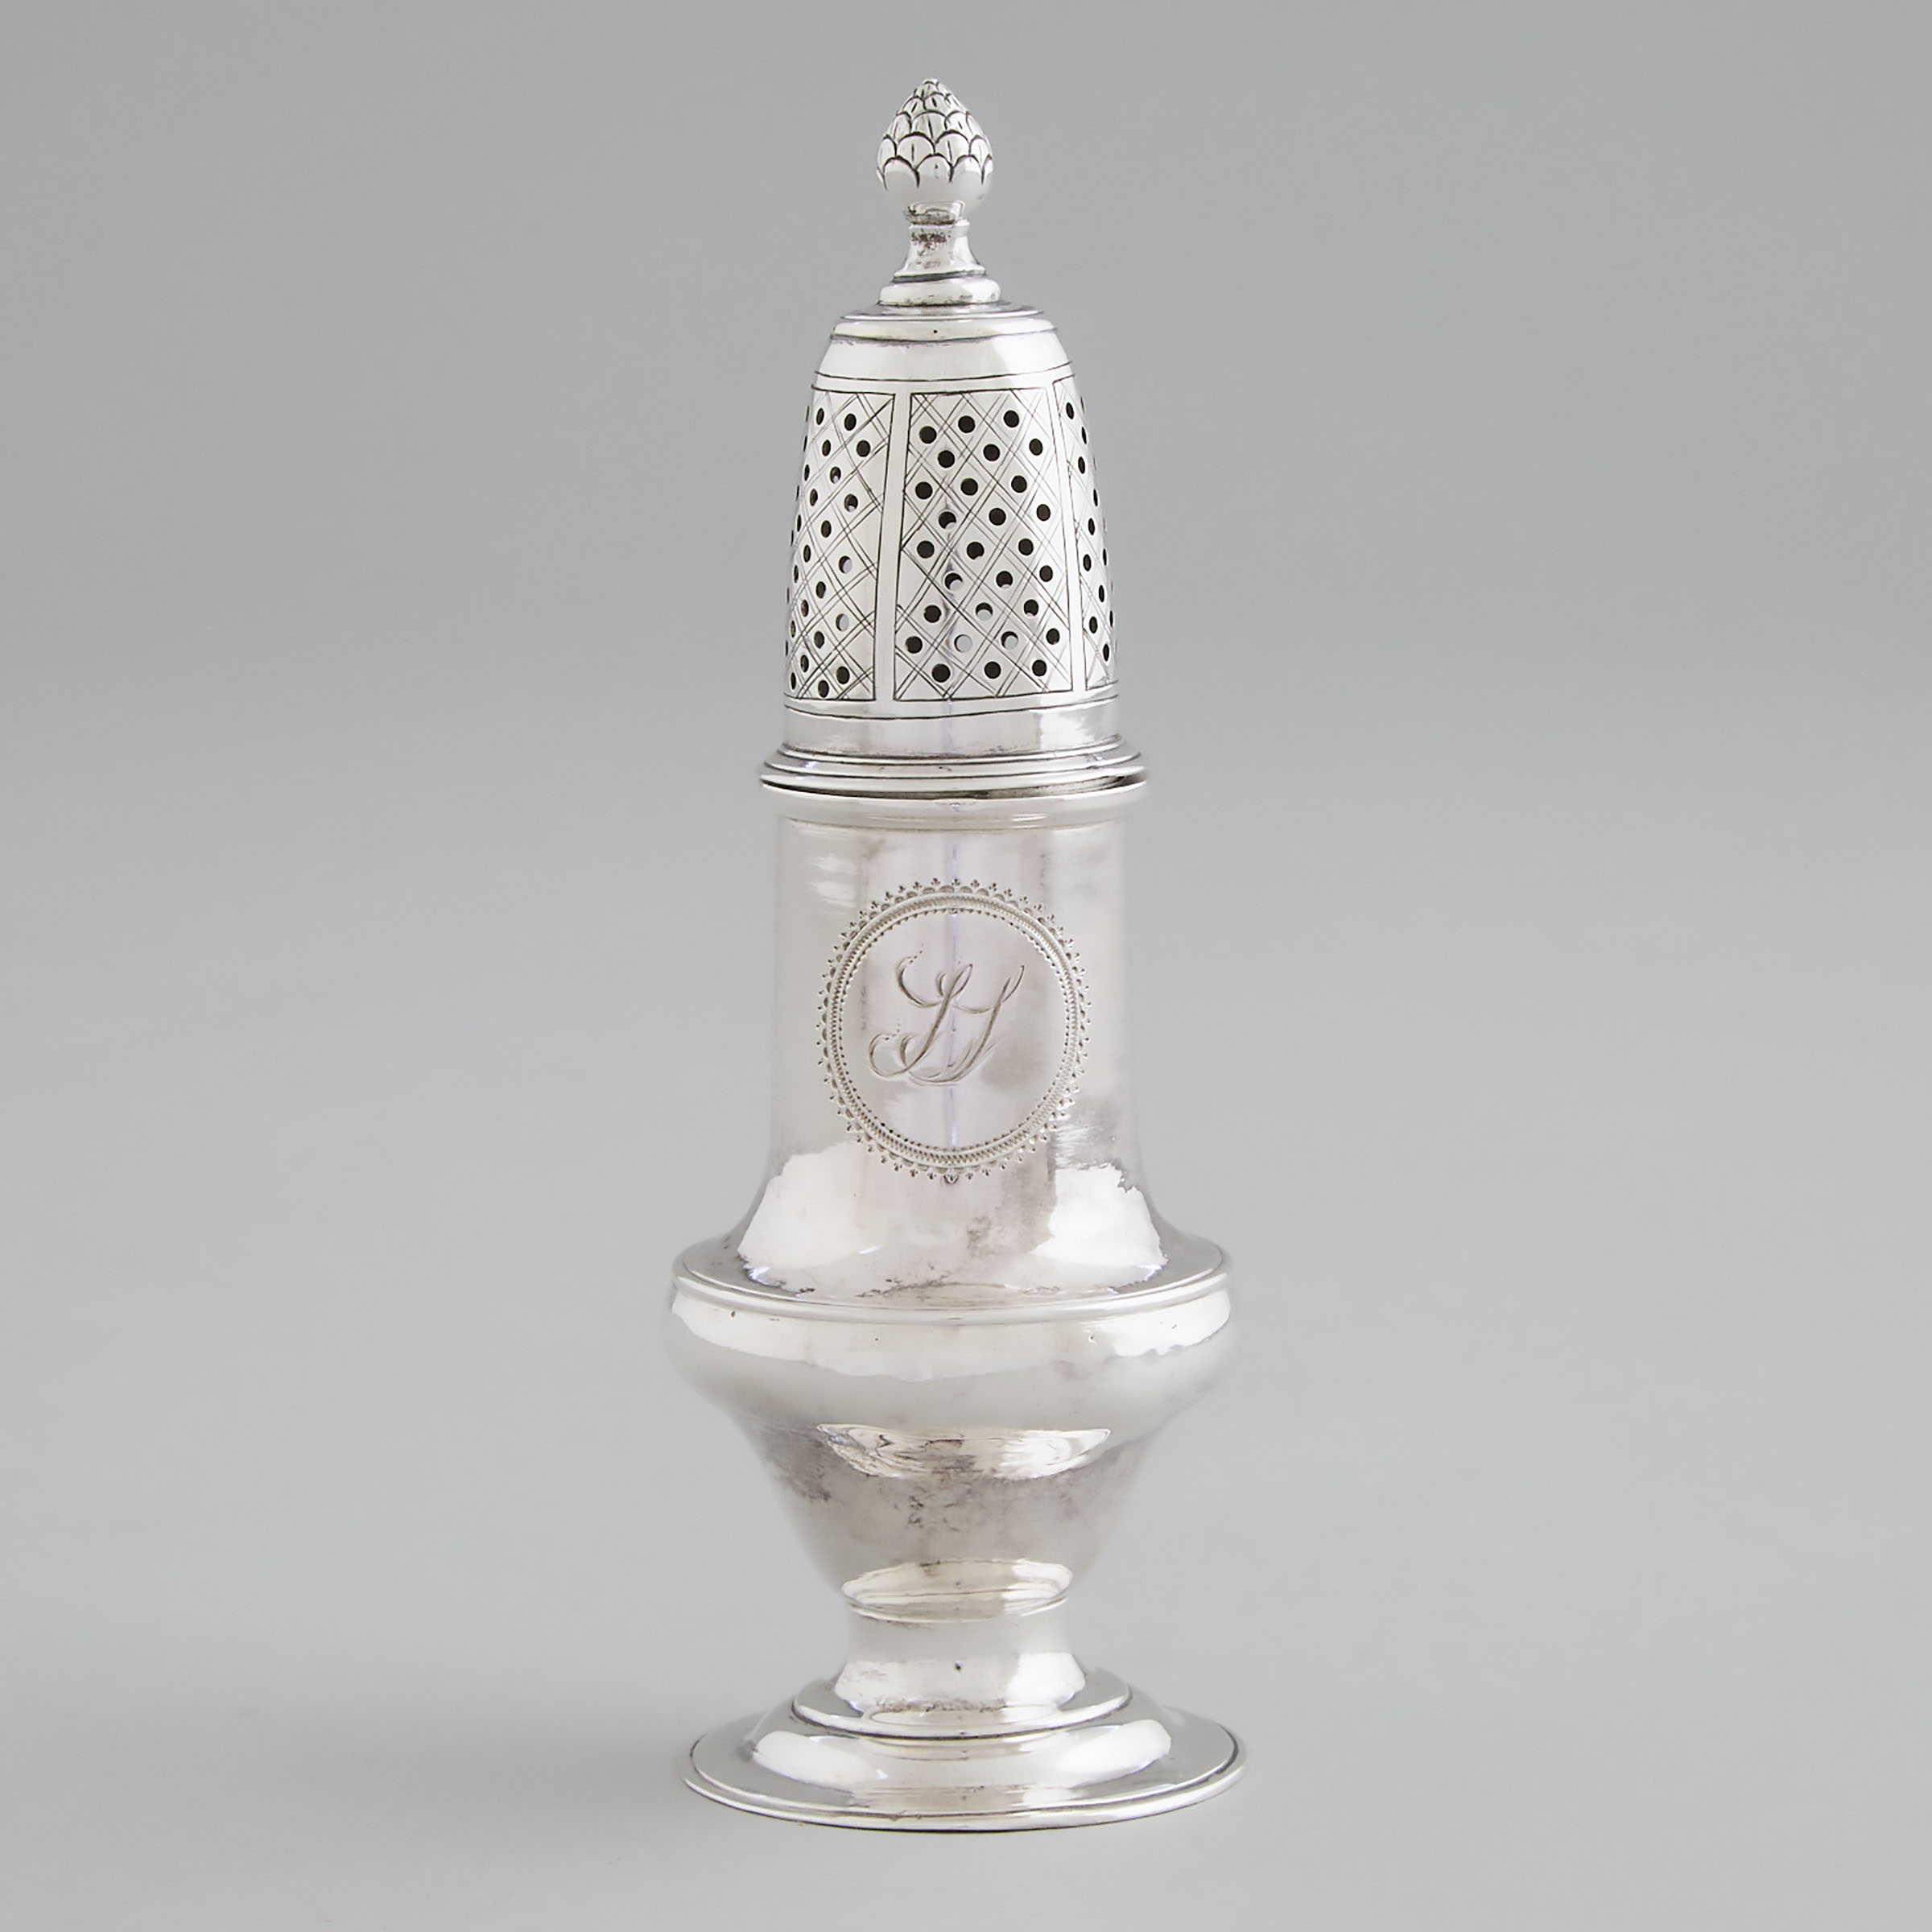 American Silver Baluster Caster, late 18th century